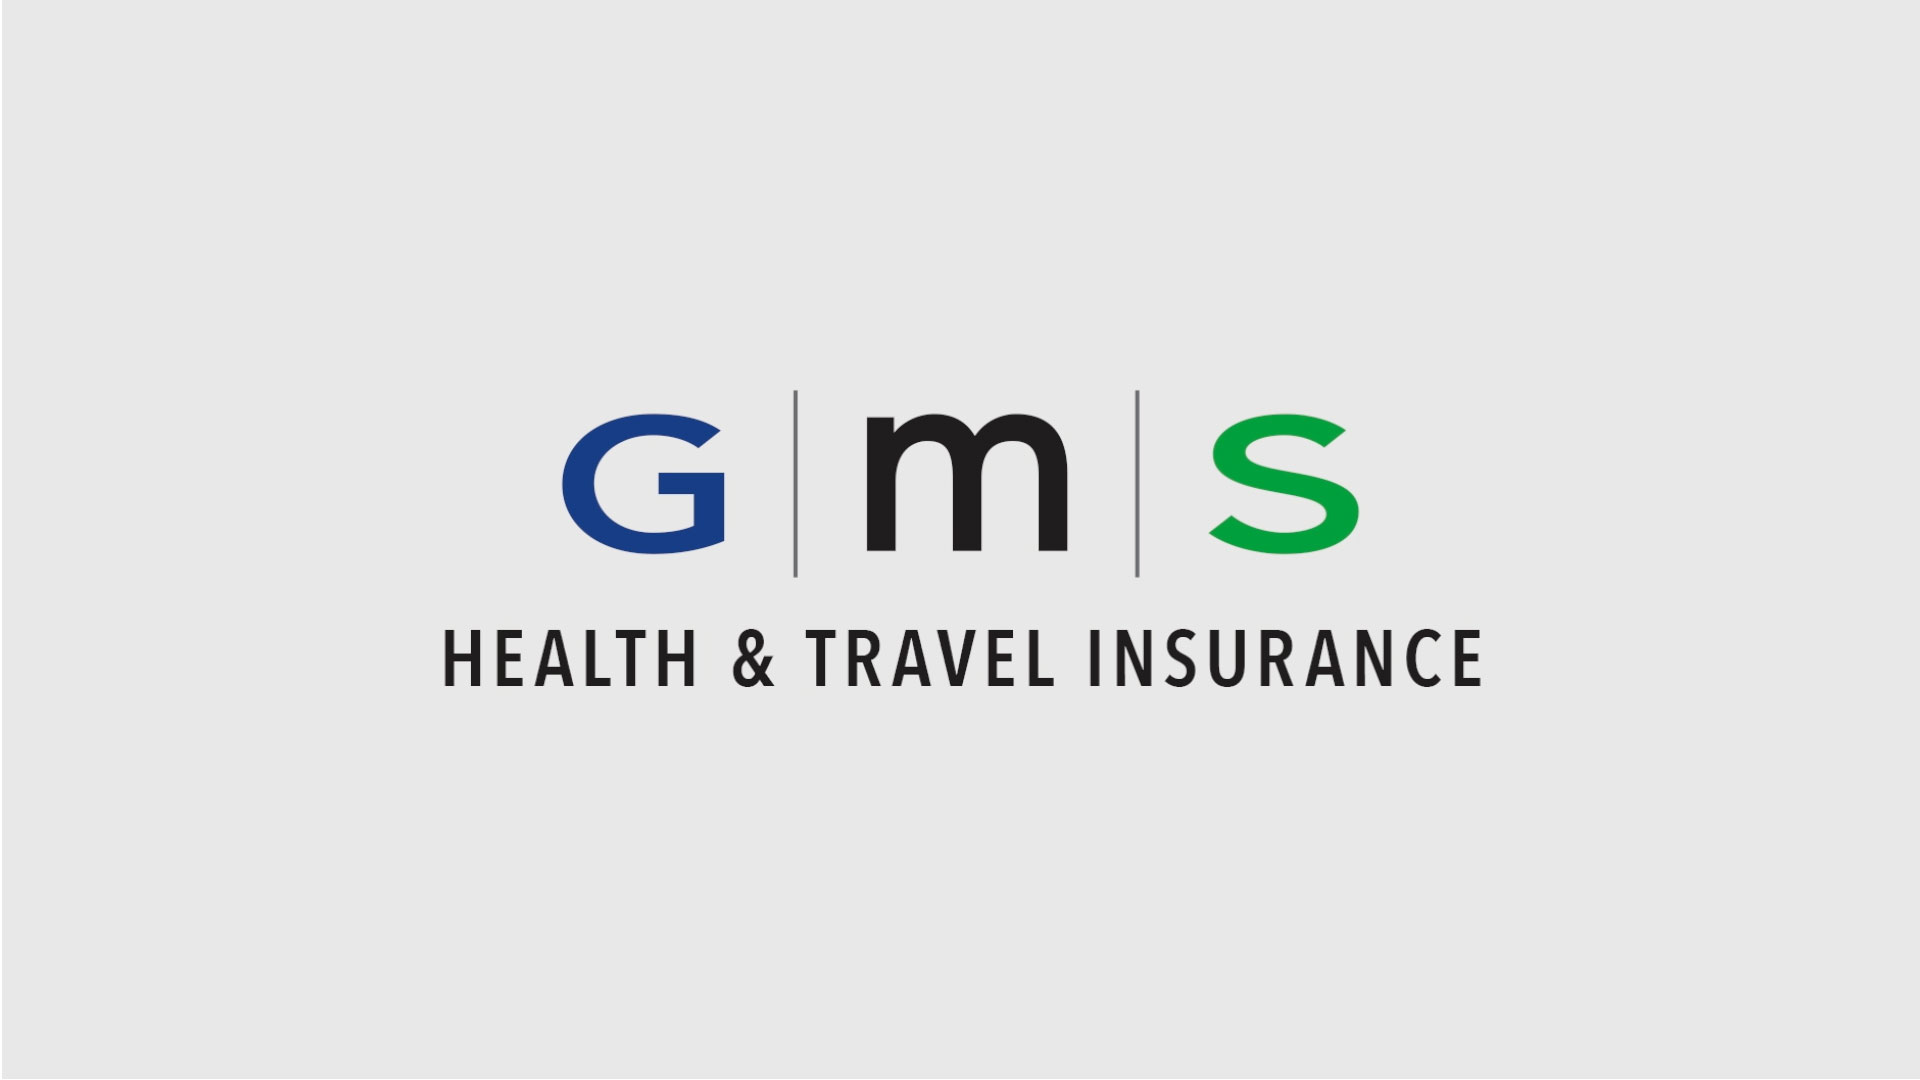 Group Medical Services, Social, GMS Between the Lines, Portfolio Image, GMS Health & Travel Insurance